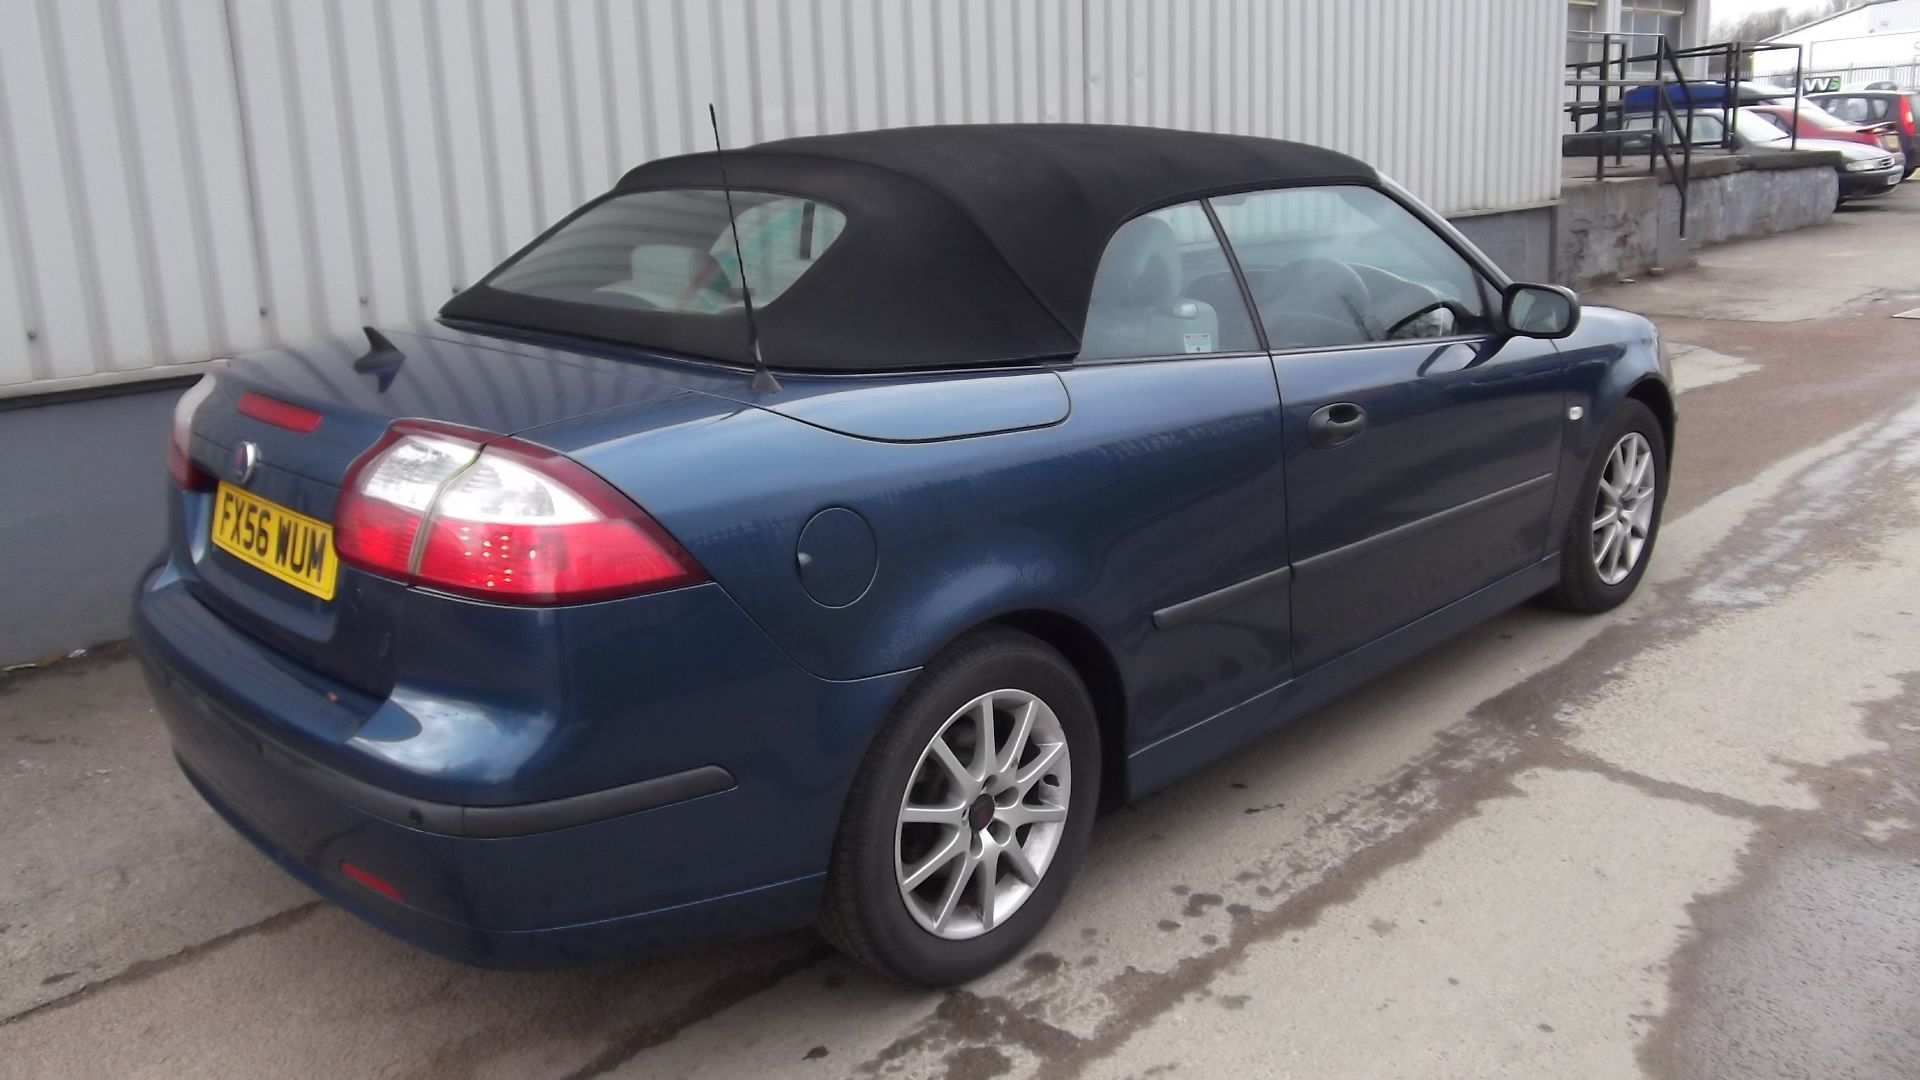 2006 Saab 9-3 Linear 150 Bhp 2.0 3Dr Convertible - FSH - CL505 - NO VAT ON THE HAMM - Image 6 of 19